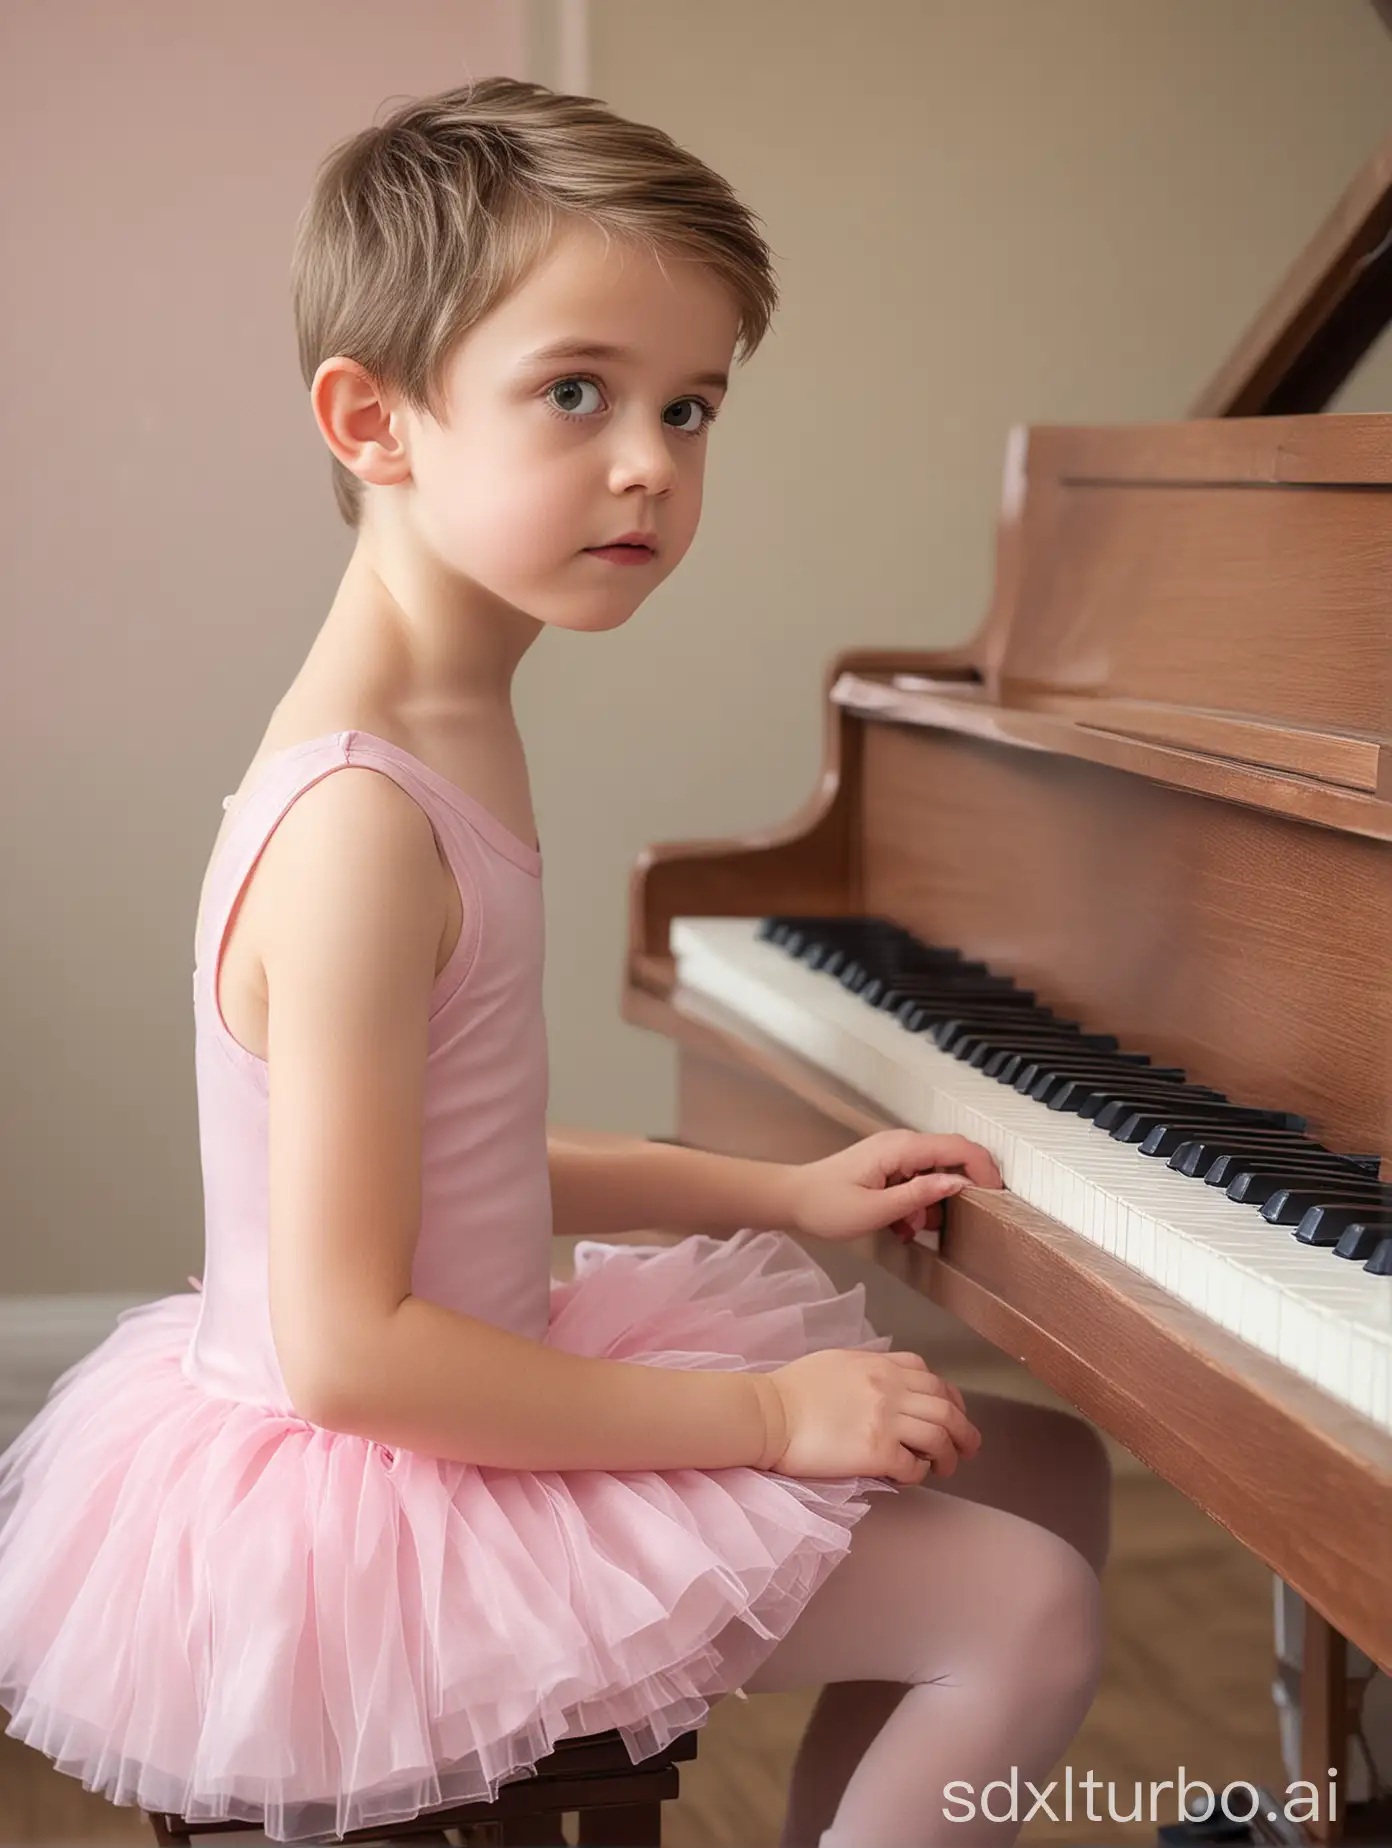 Digital photography of nervous cute boy forced to sit in a pink ballet dress playing piano, white boy, cute face (((gender role reversal)))